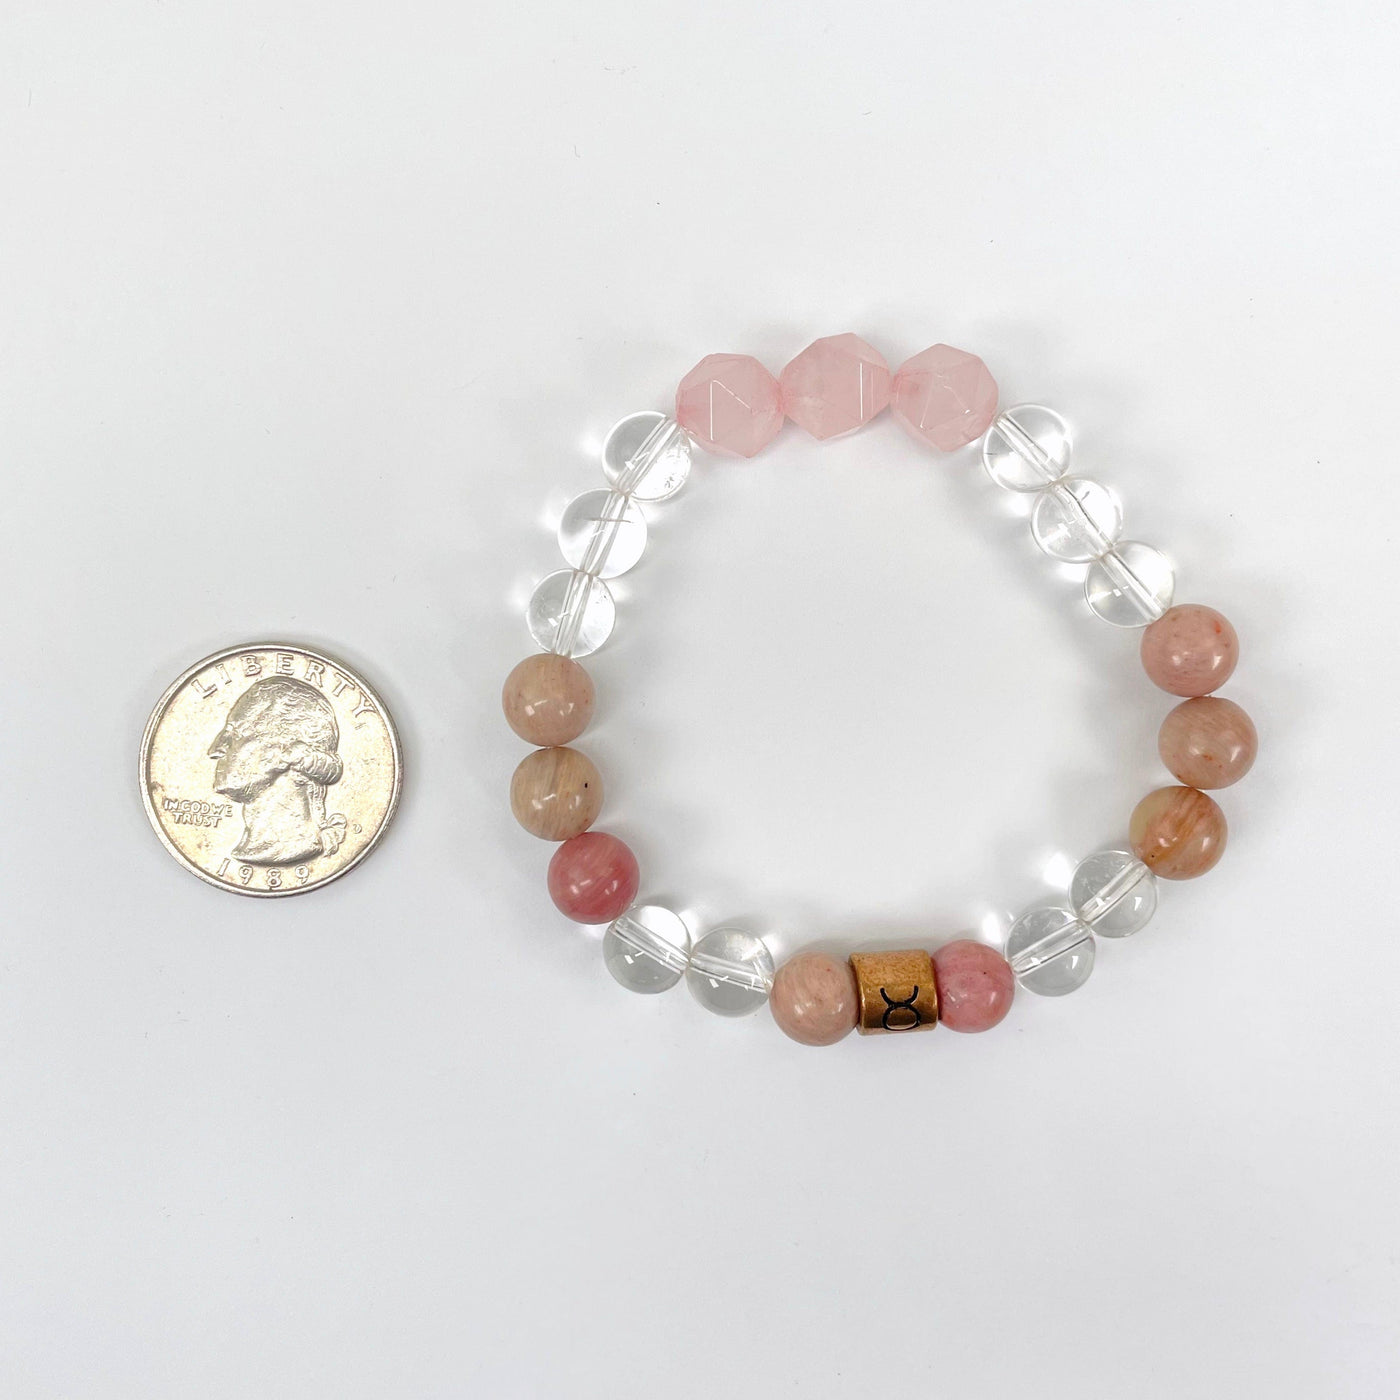 taurus zodiac bracelet with quarter for size reference